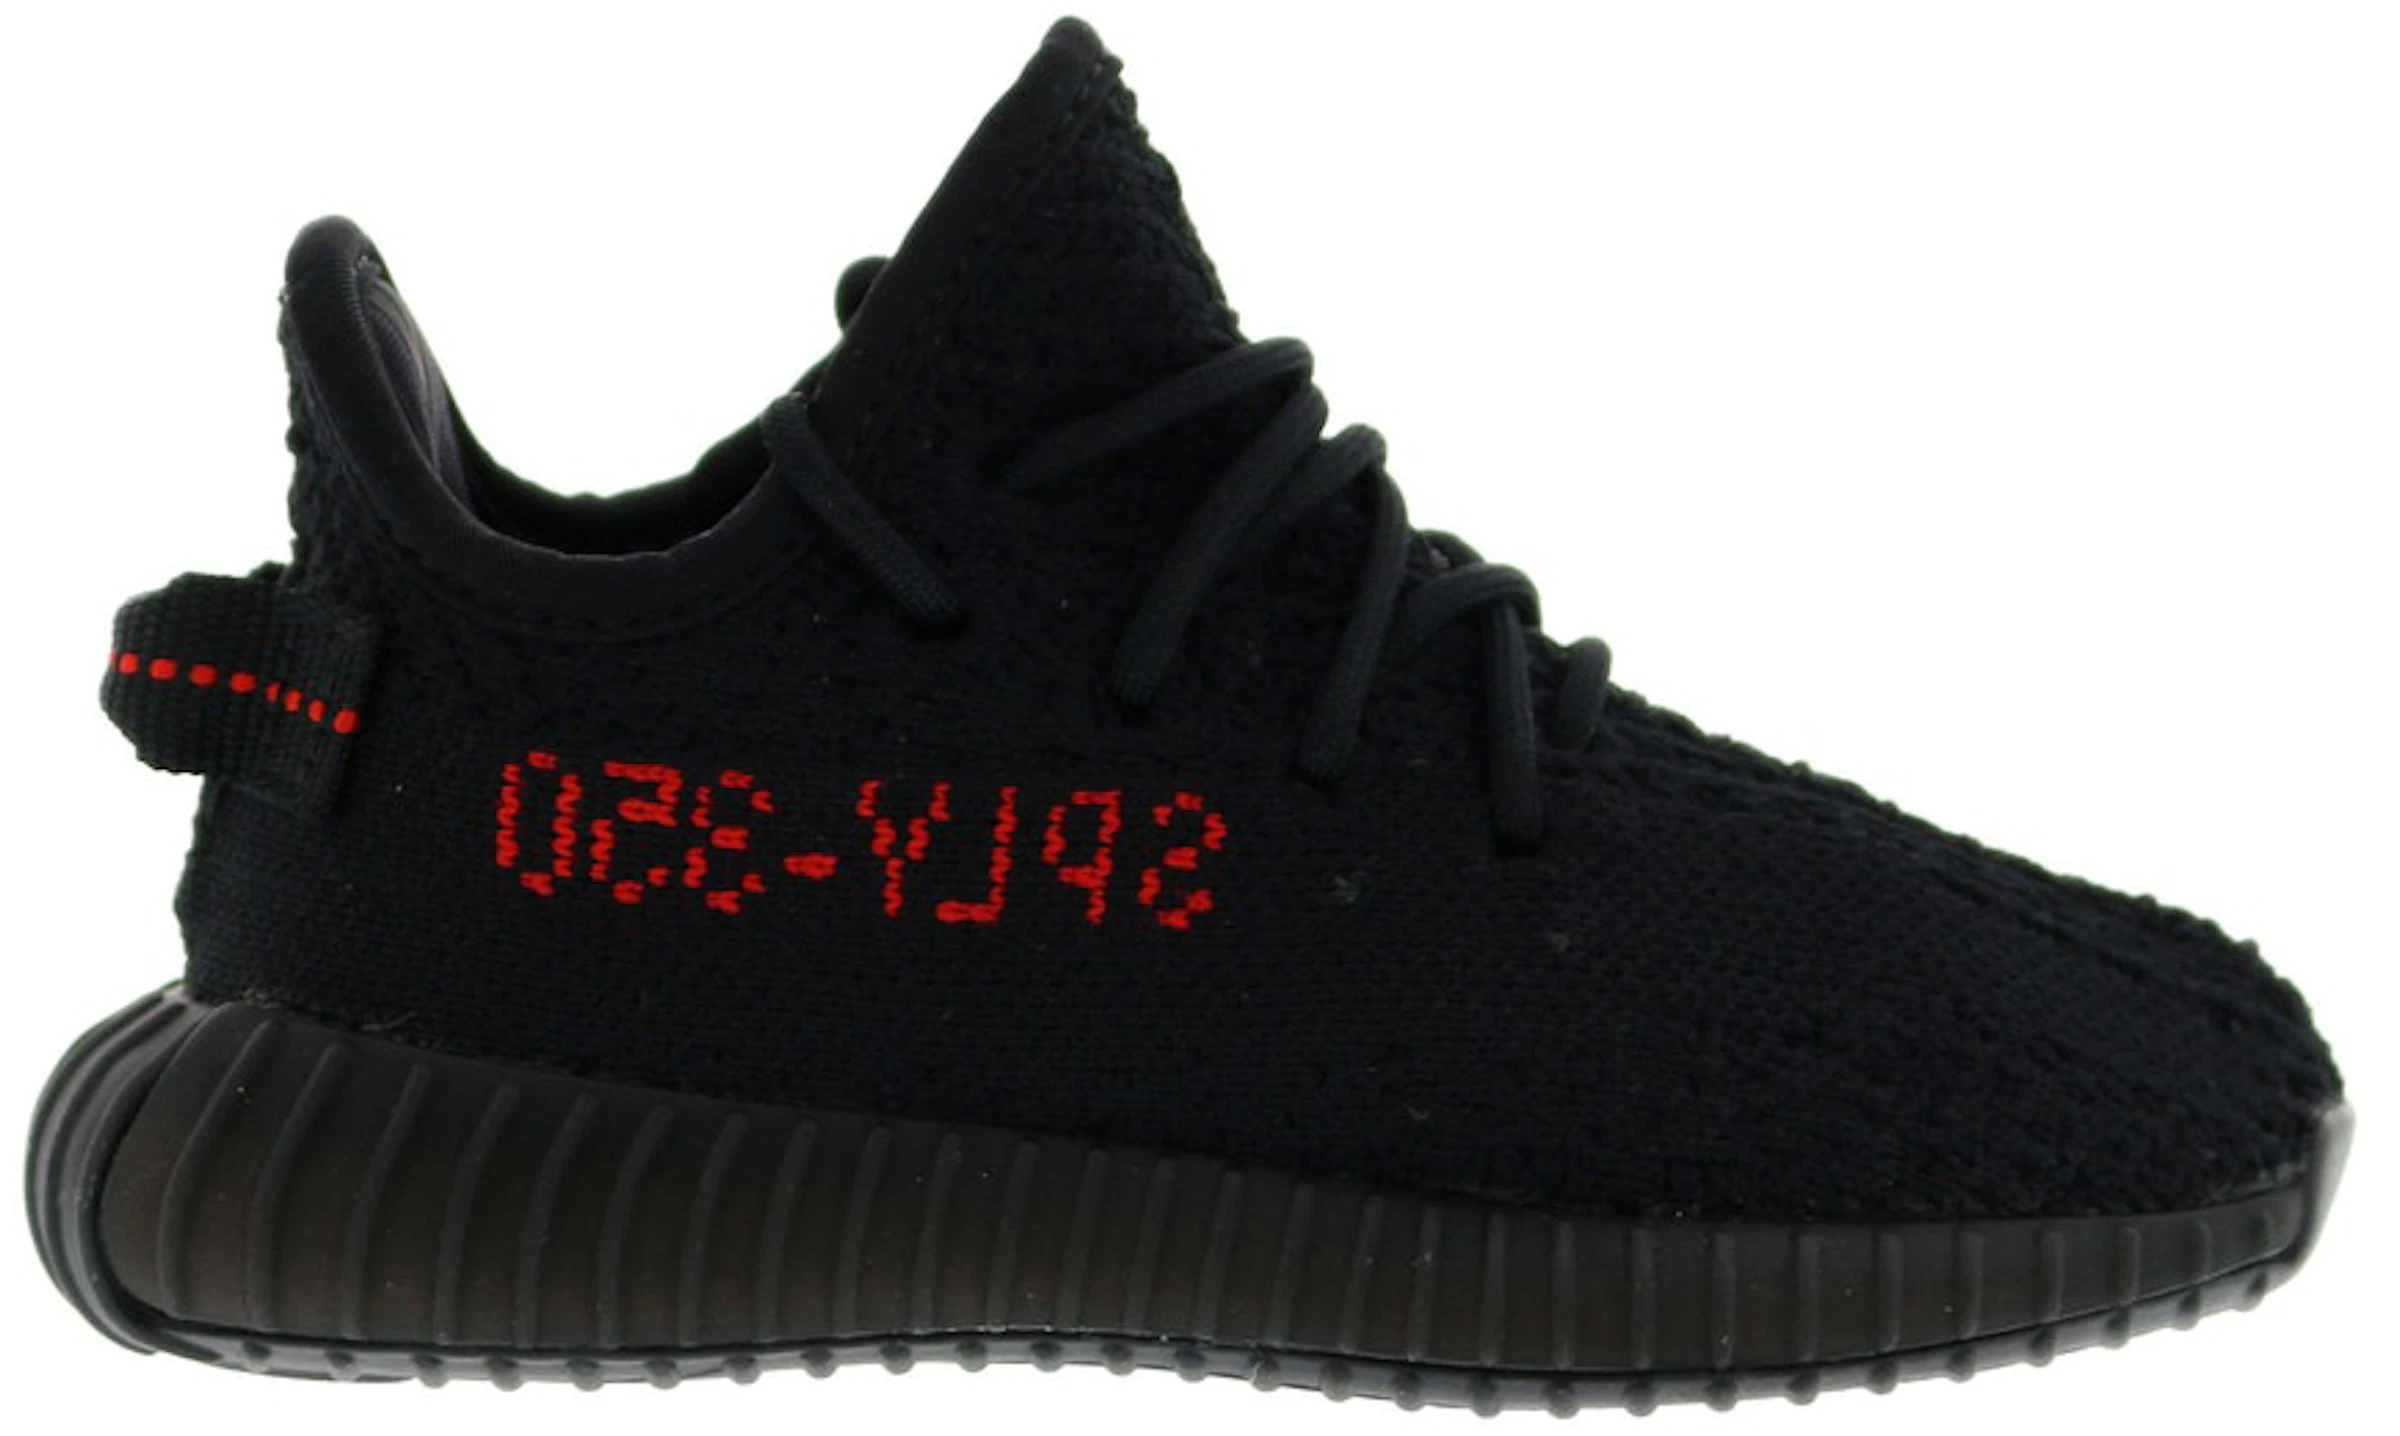 adidas Yeezy Boost 350 Red (Infant) - BB6372 - US